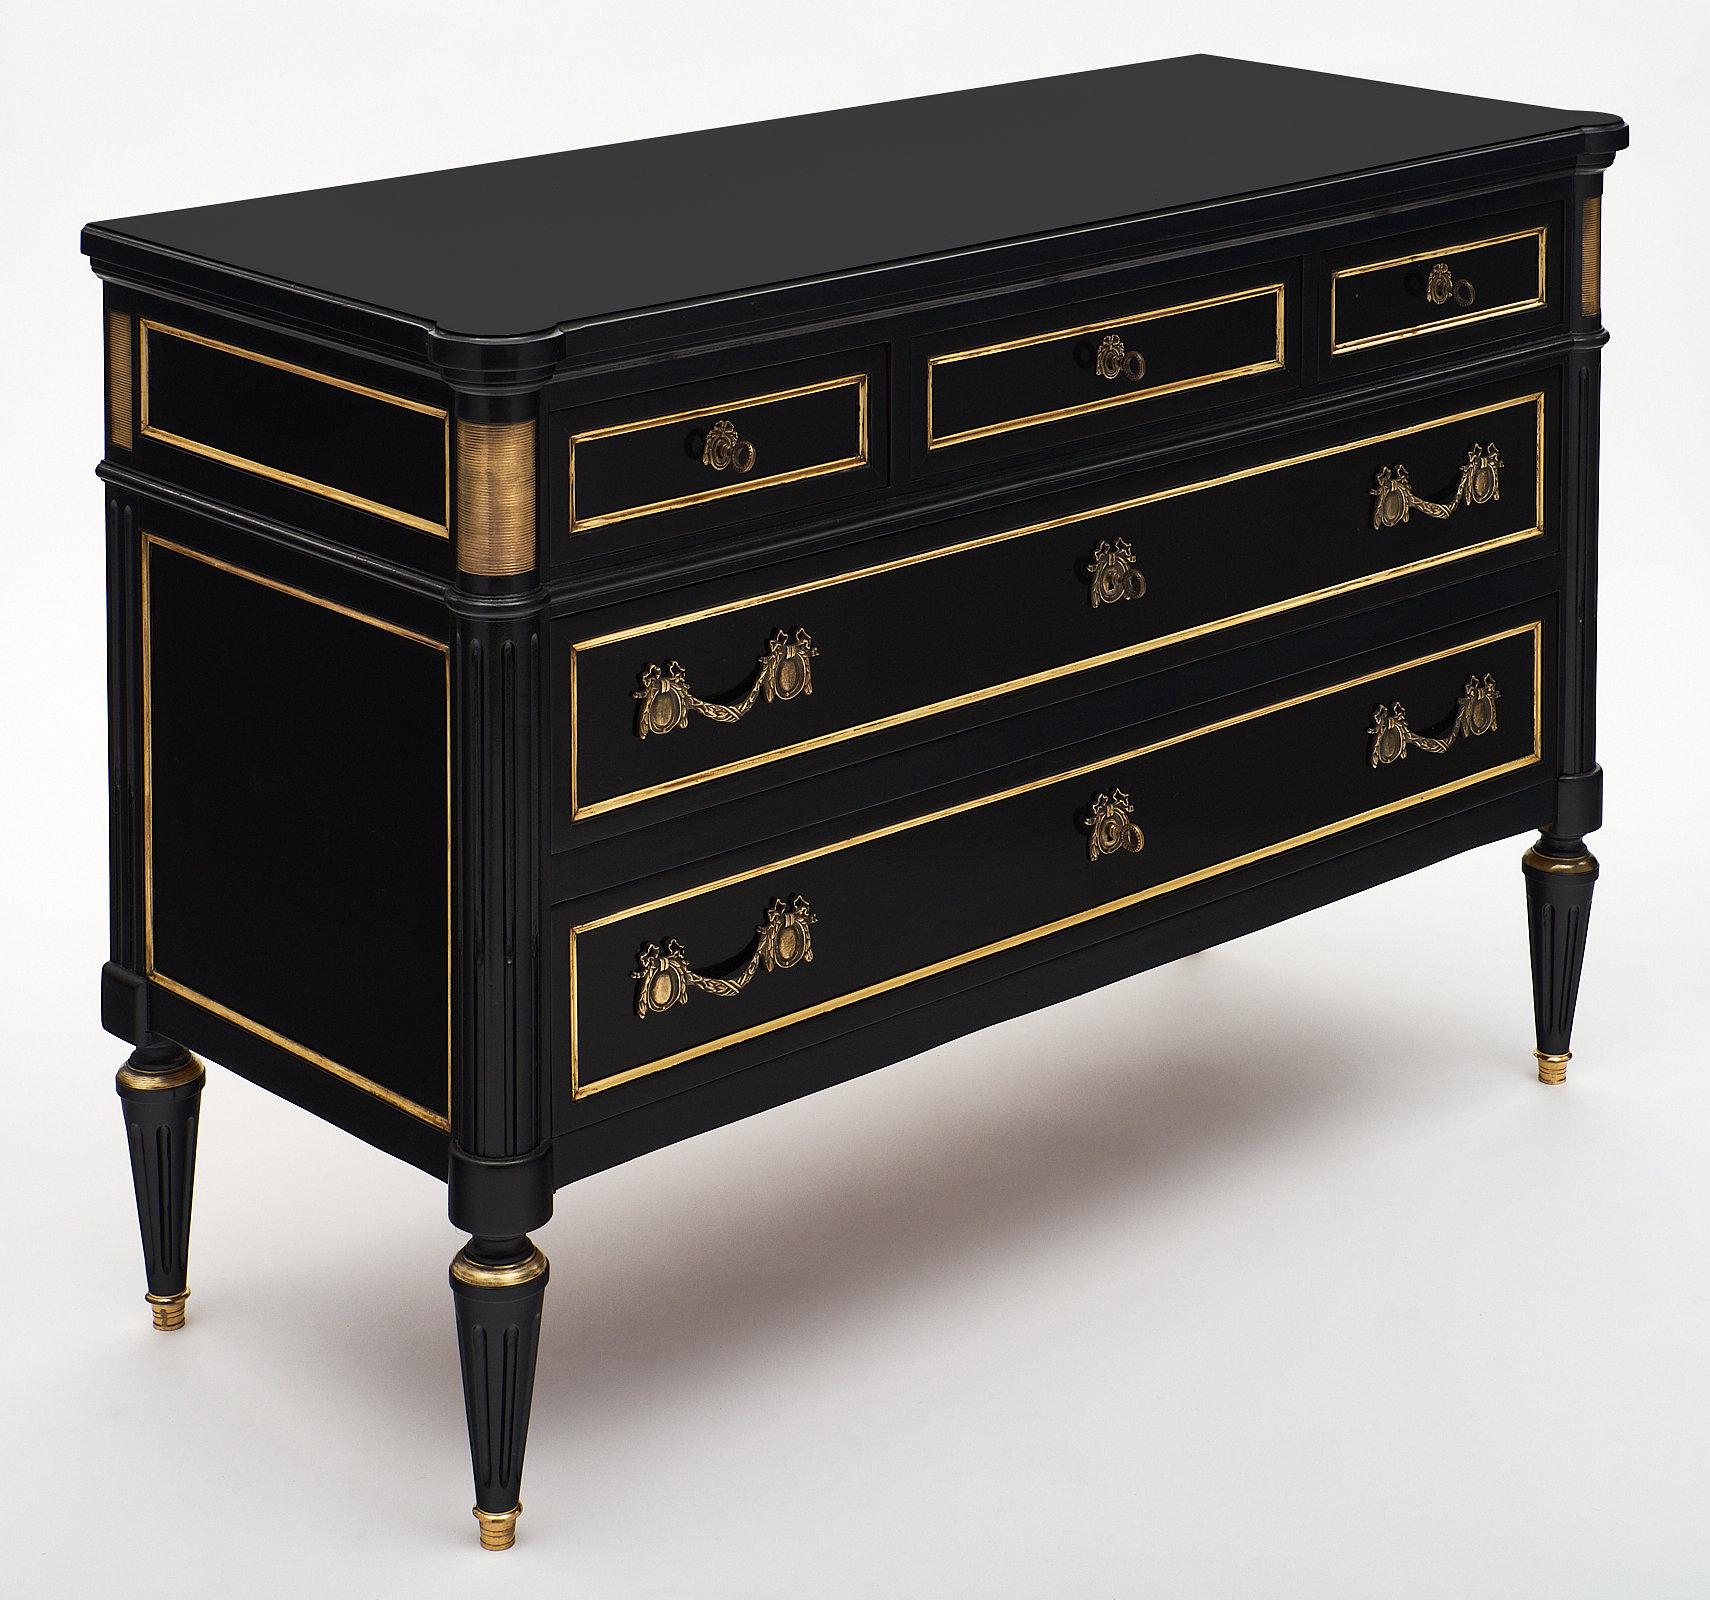 A French antique Louis XVI style chest of drawers featuring five dovetailed drawers and finely cast hardware. This piece is made of ebonized mahogany, finished with a lustrous French polish. We love the gilt trims throughout. This elegant “commode”